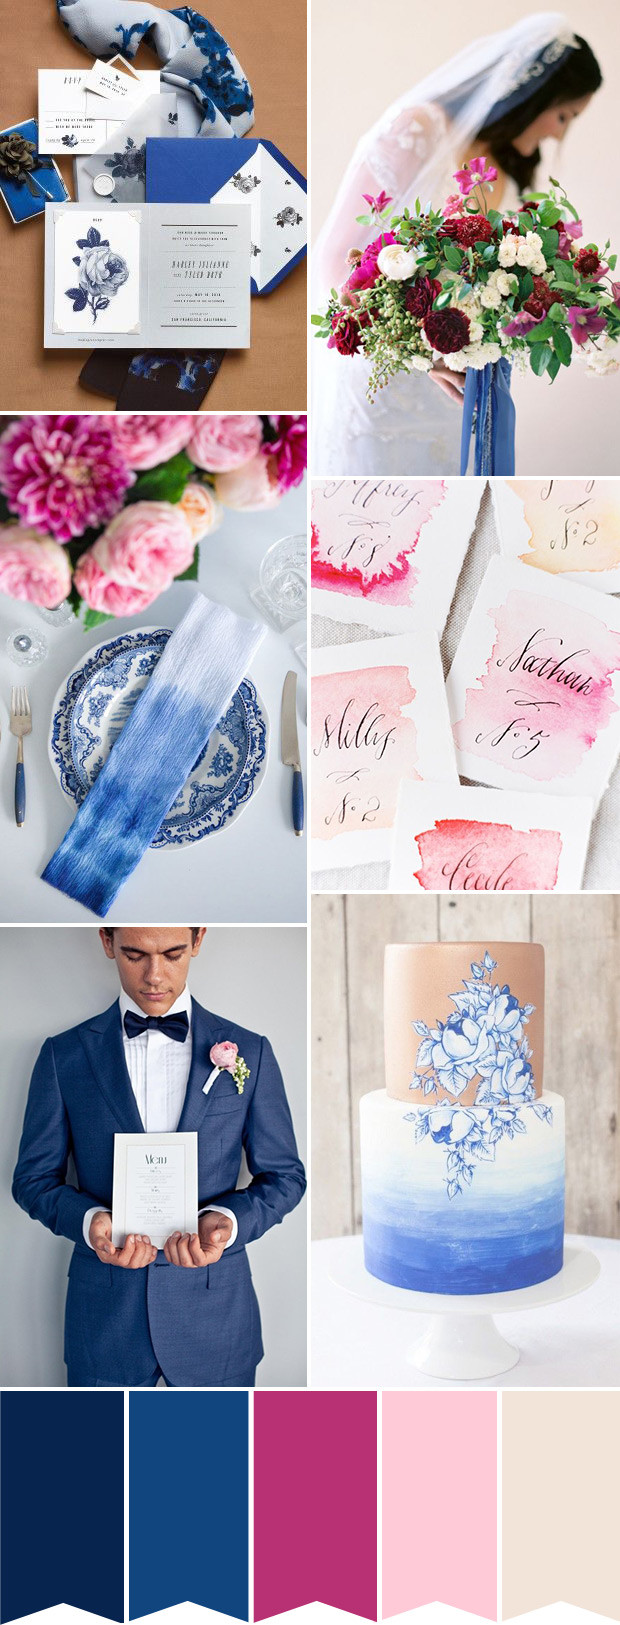 Blue And Pink Wedding Colors
 Modern meets Tradition A Different Blue & Pink Wedding